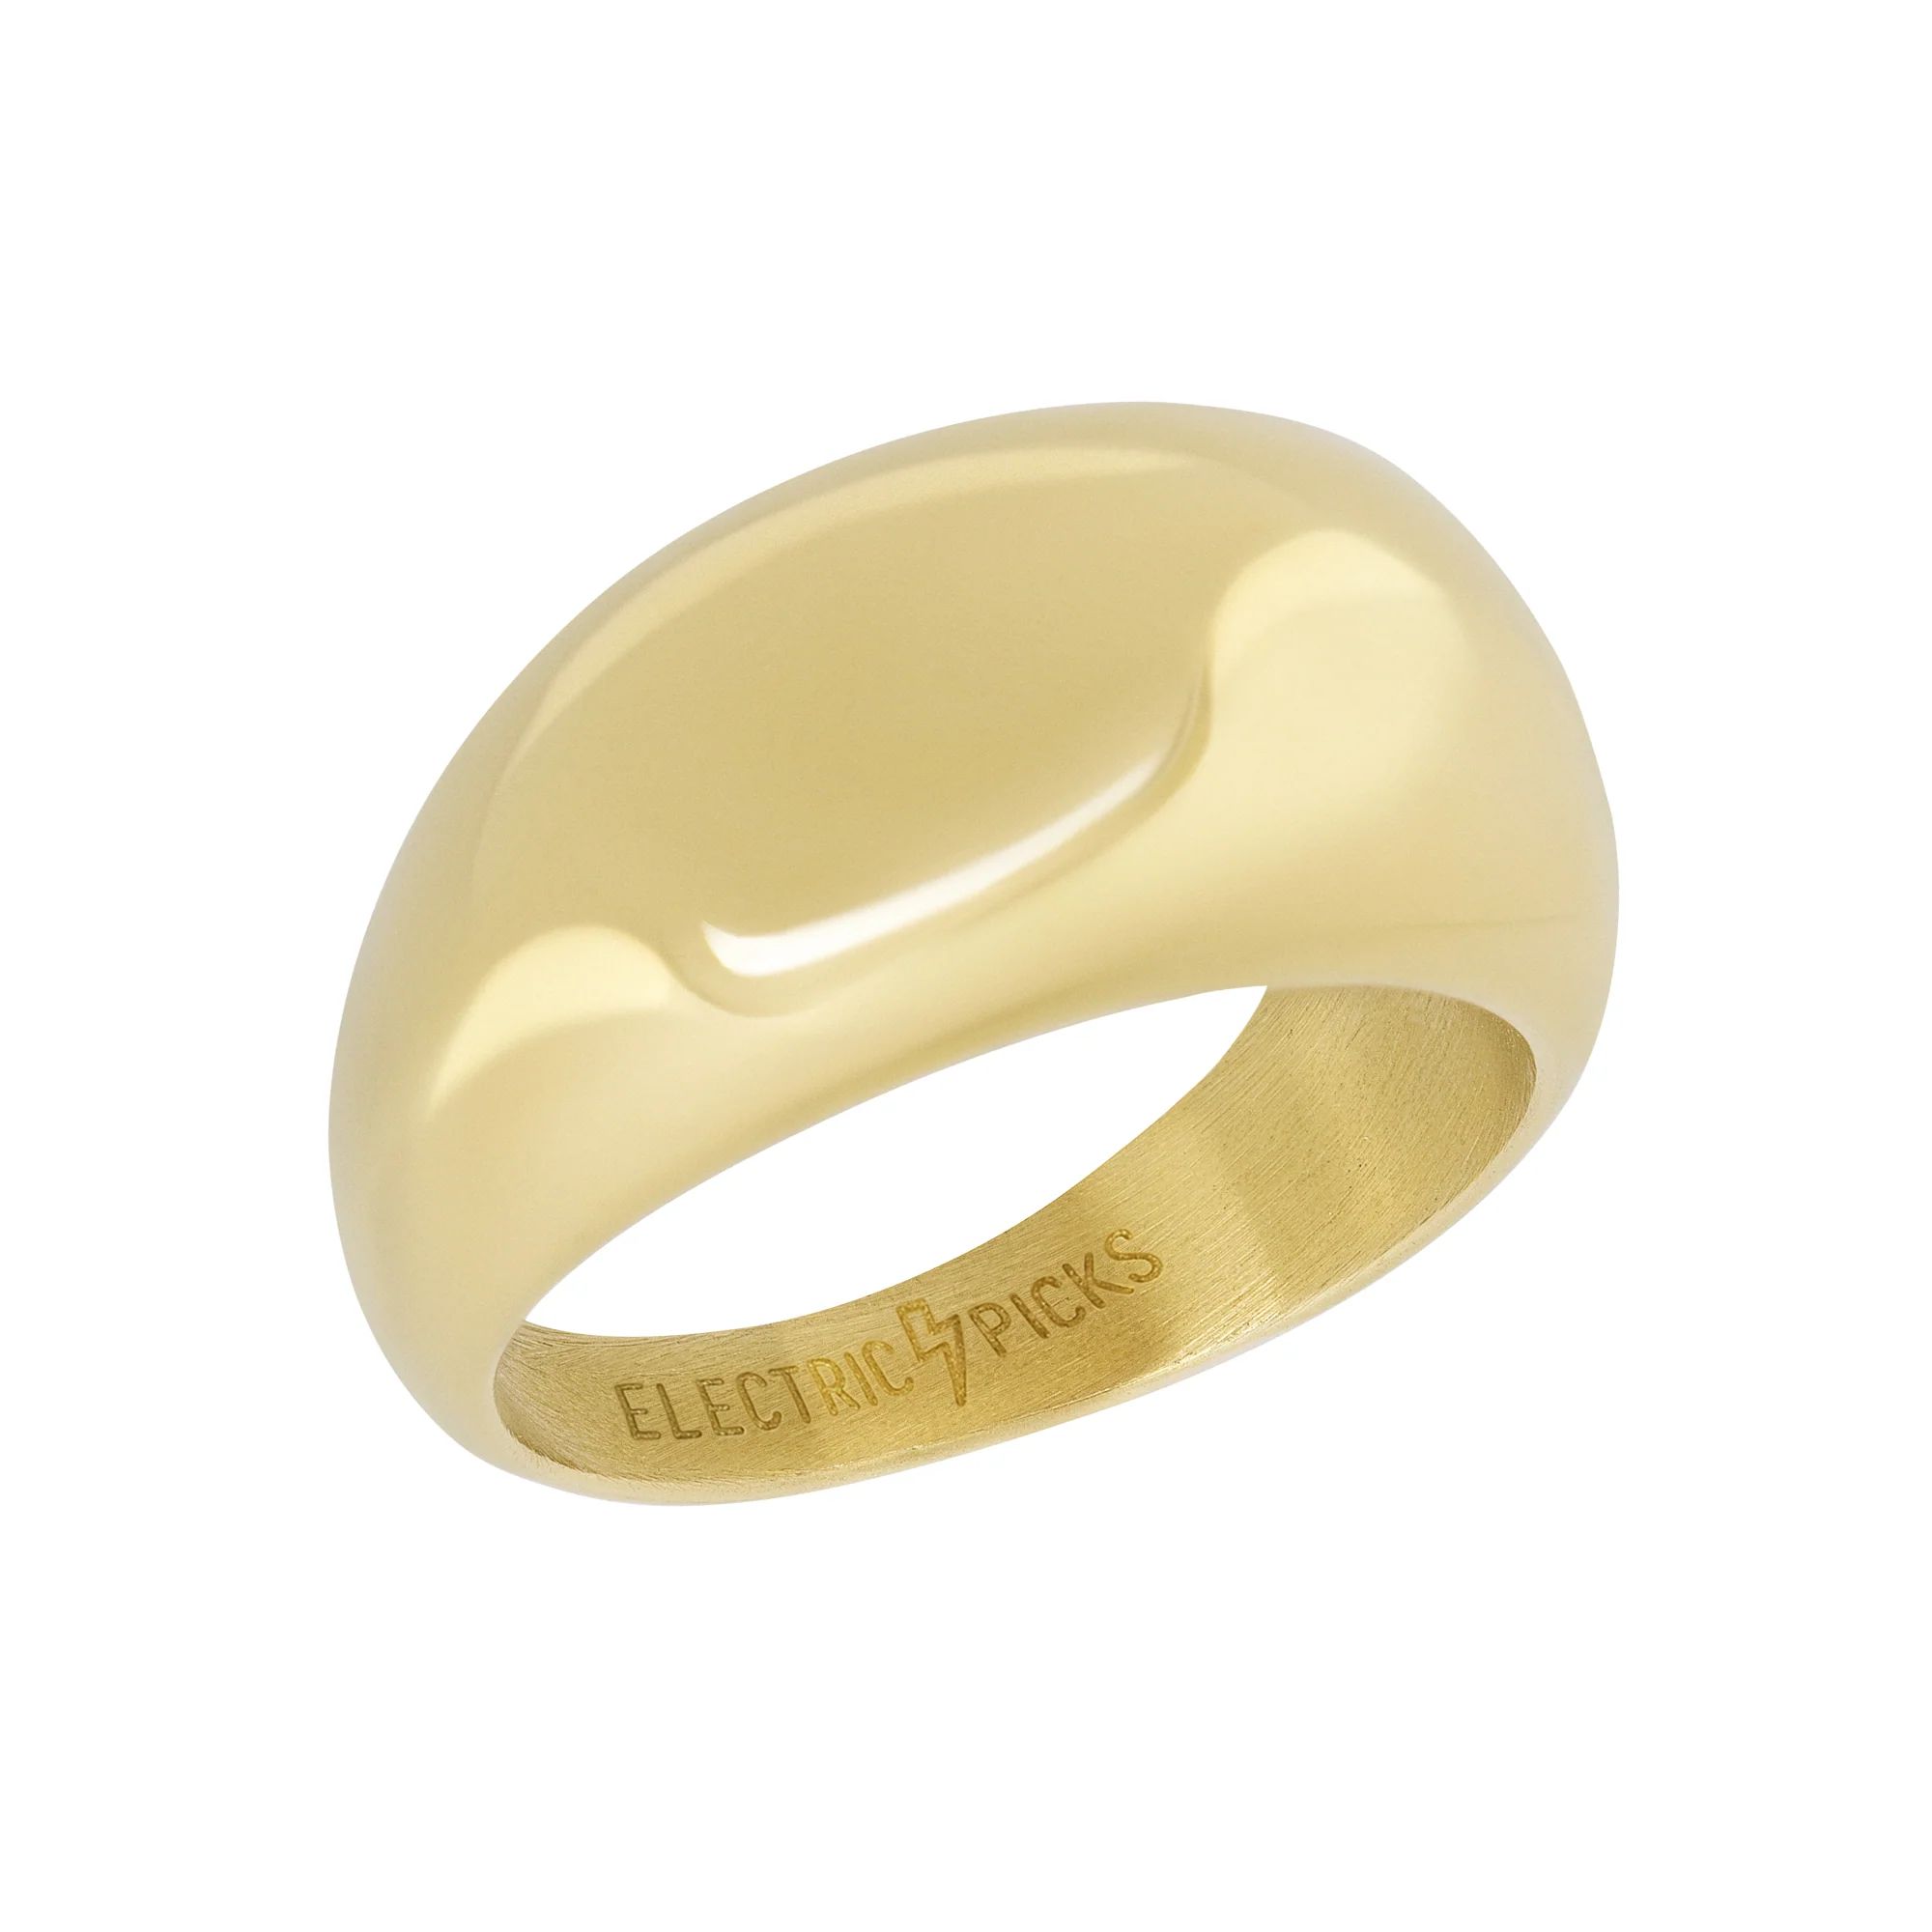 Allure Ring | Electric Picks Jewelry